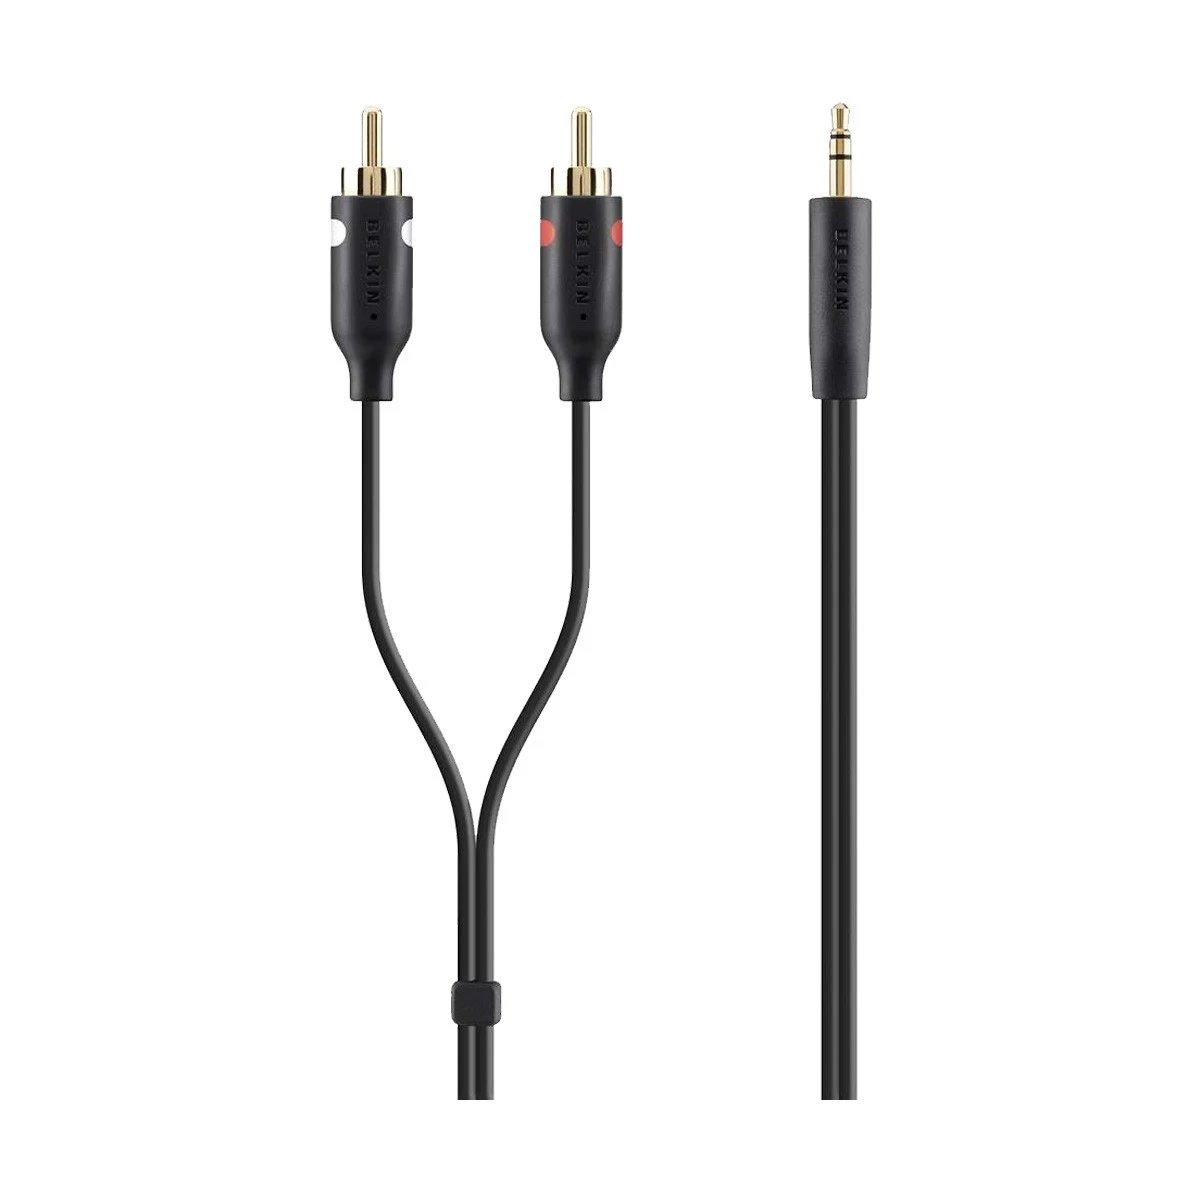 Belkin 3.5mm Male to 2 RCA Male, 2 Meter, Black Audio Cable # F3Y116BT2M